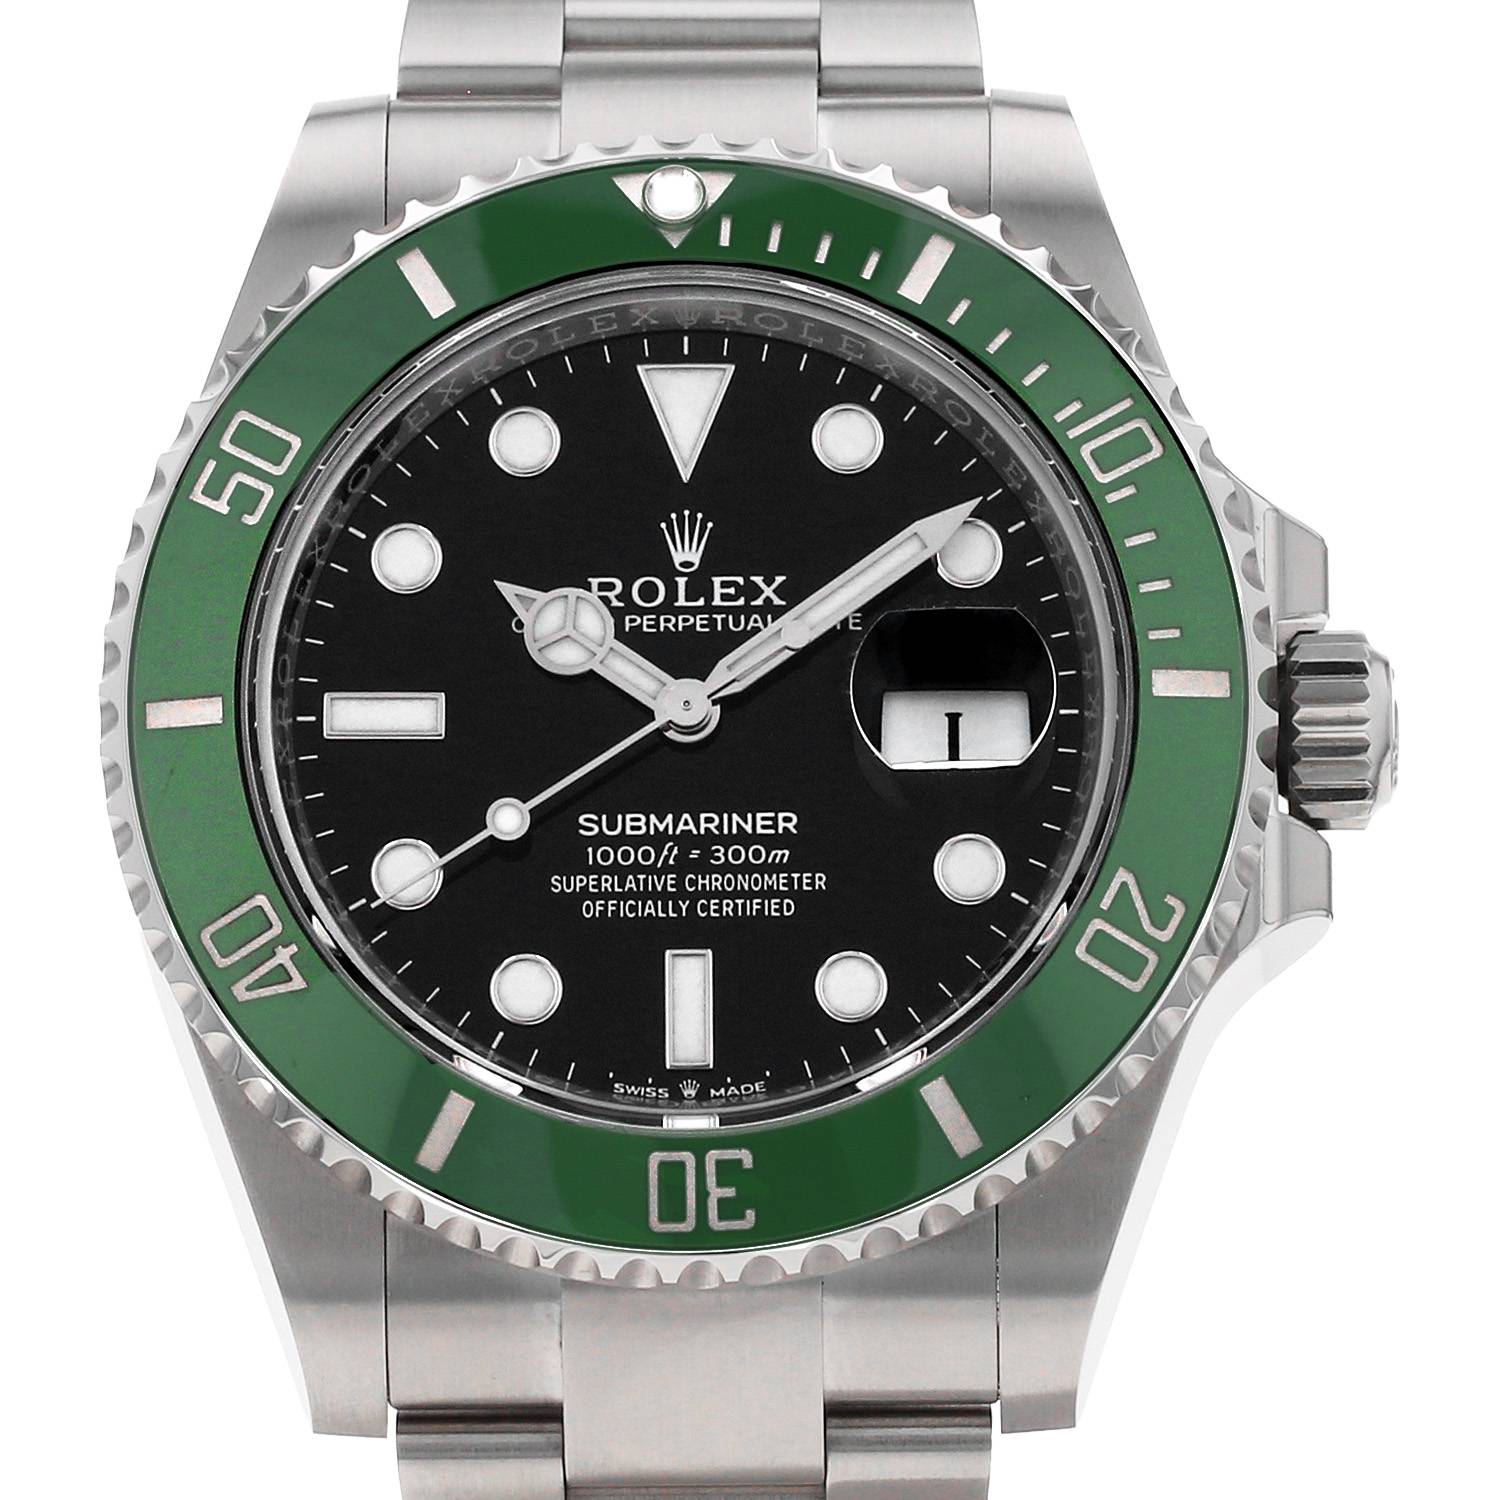 Submariner Date In Stainless Steel Ref: 126610Lv Circa